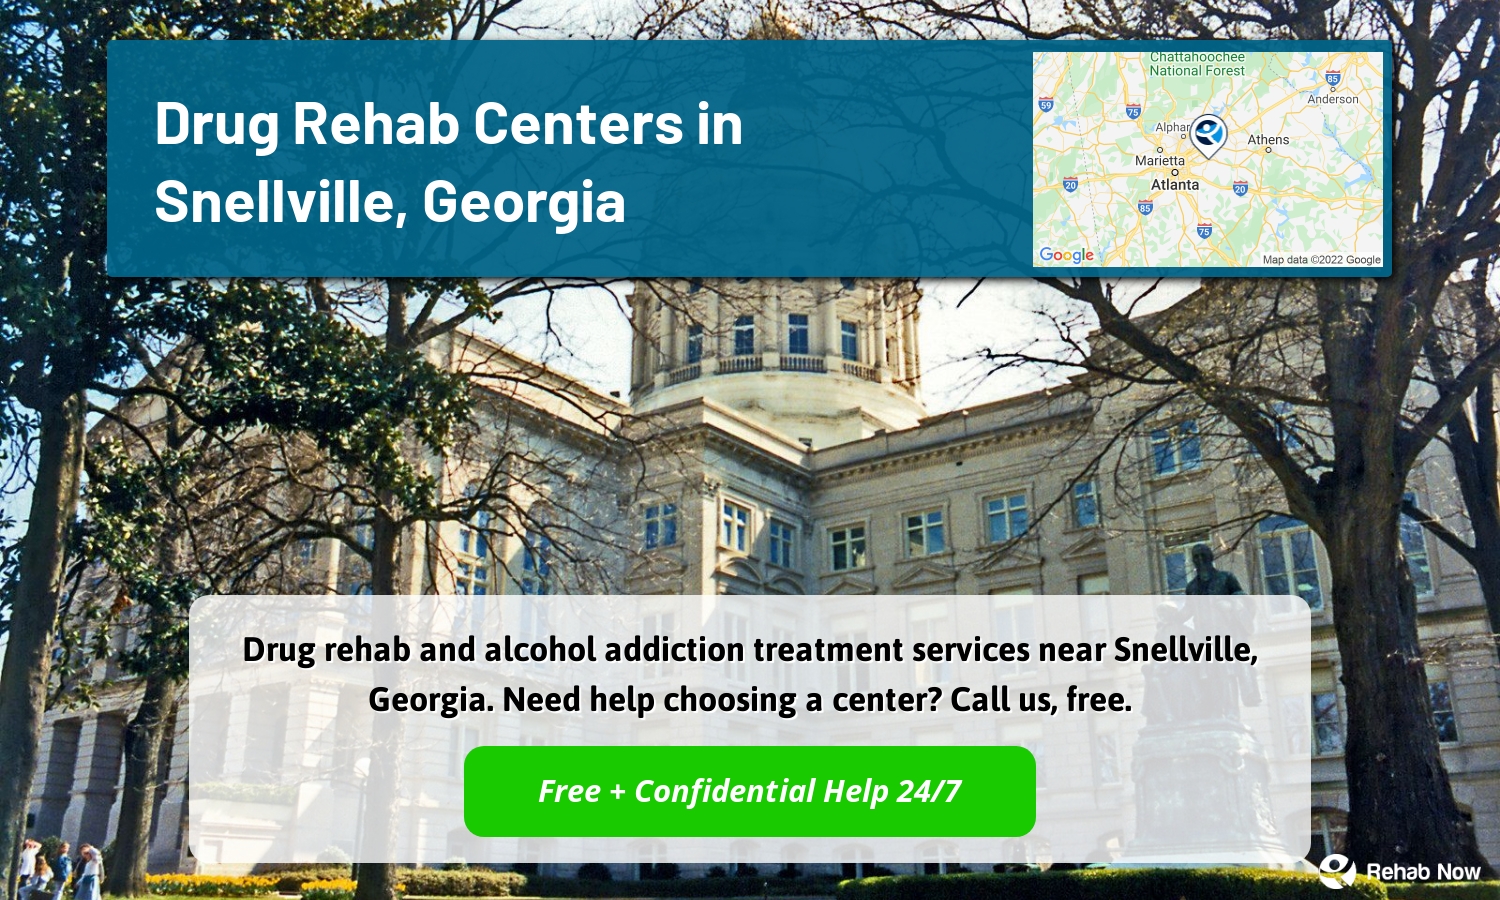 Drug rehab and alcohol addiction treatment services near Snellville, Georgia. Need help choosing a center? Call us, free.